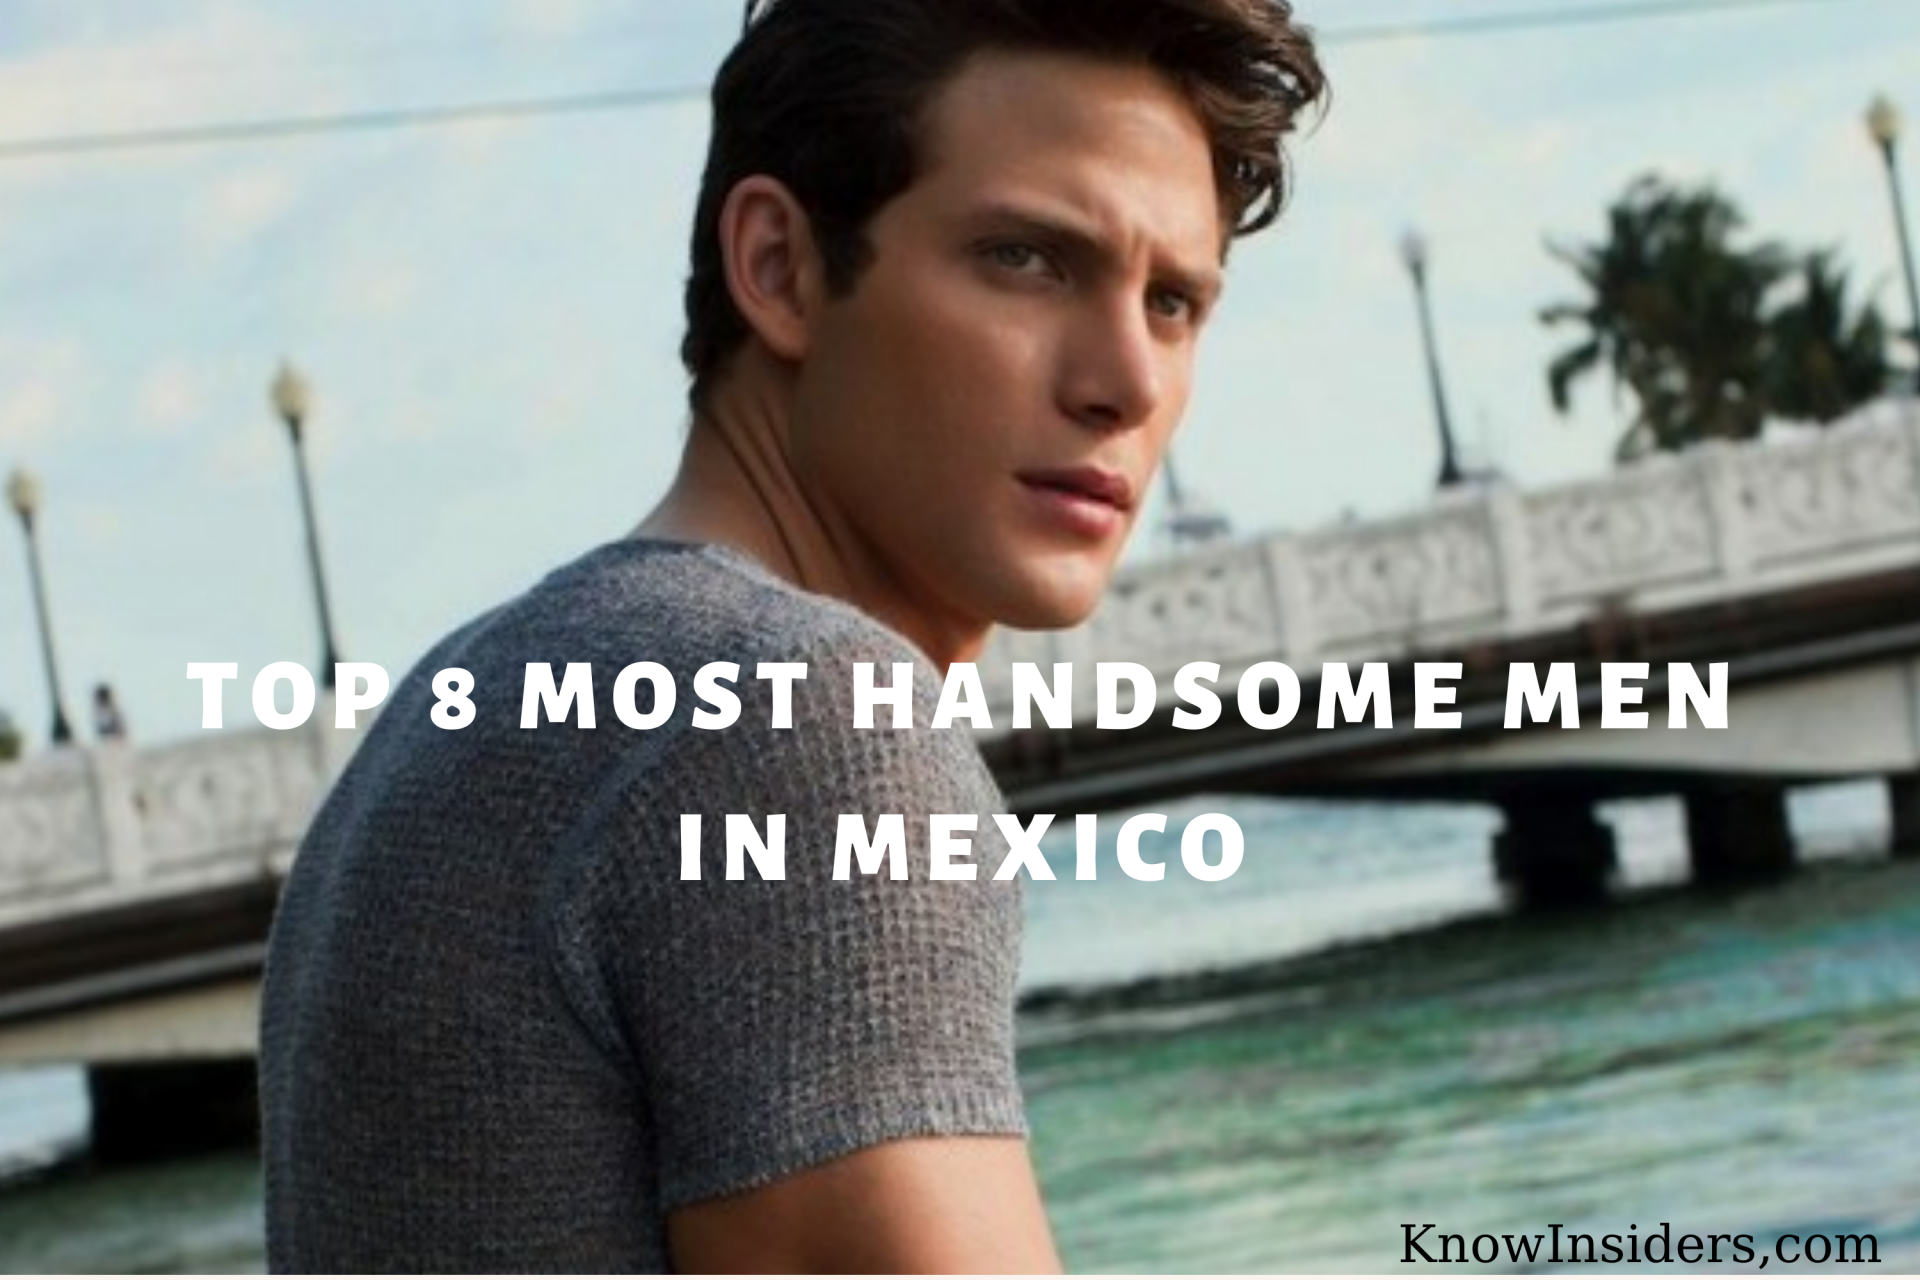 Top 8 Most Handsome Men in Mexico - Updated